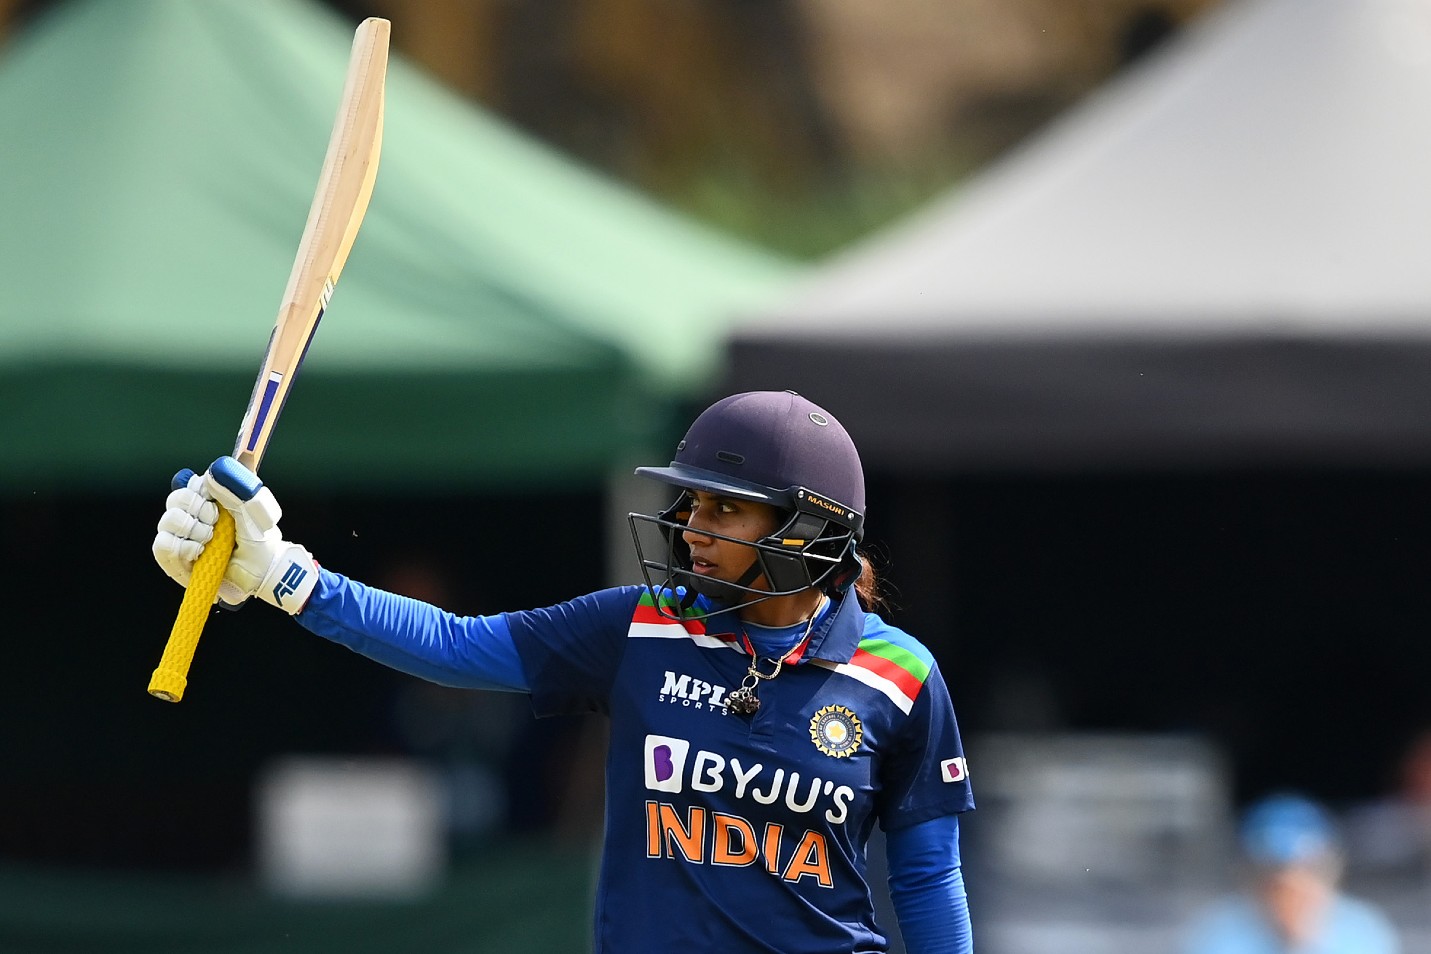 'I Don't Seek Validation From People' : Mithali Raj Reacts To The Criticisms Towards Her Strike Rate